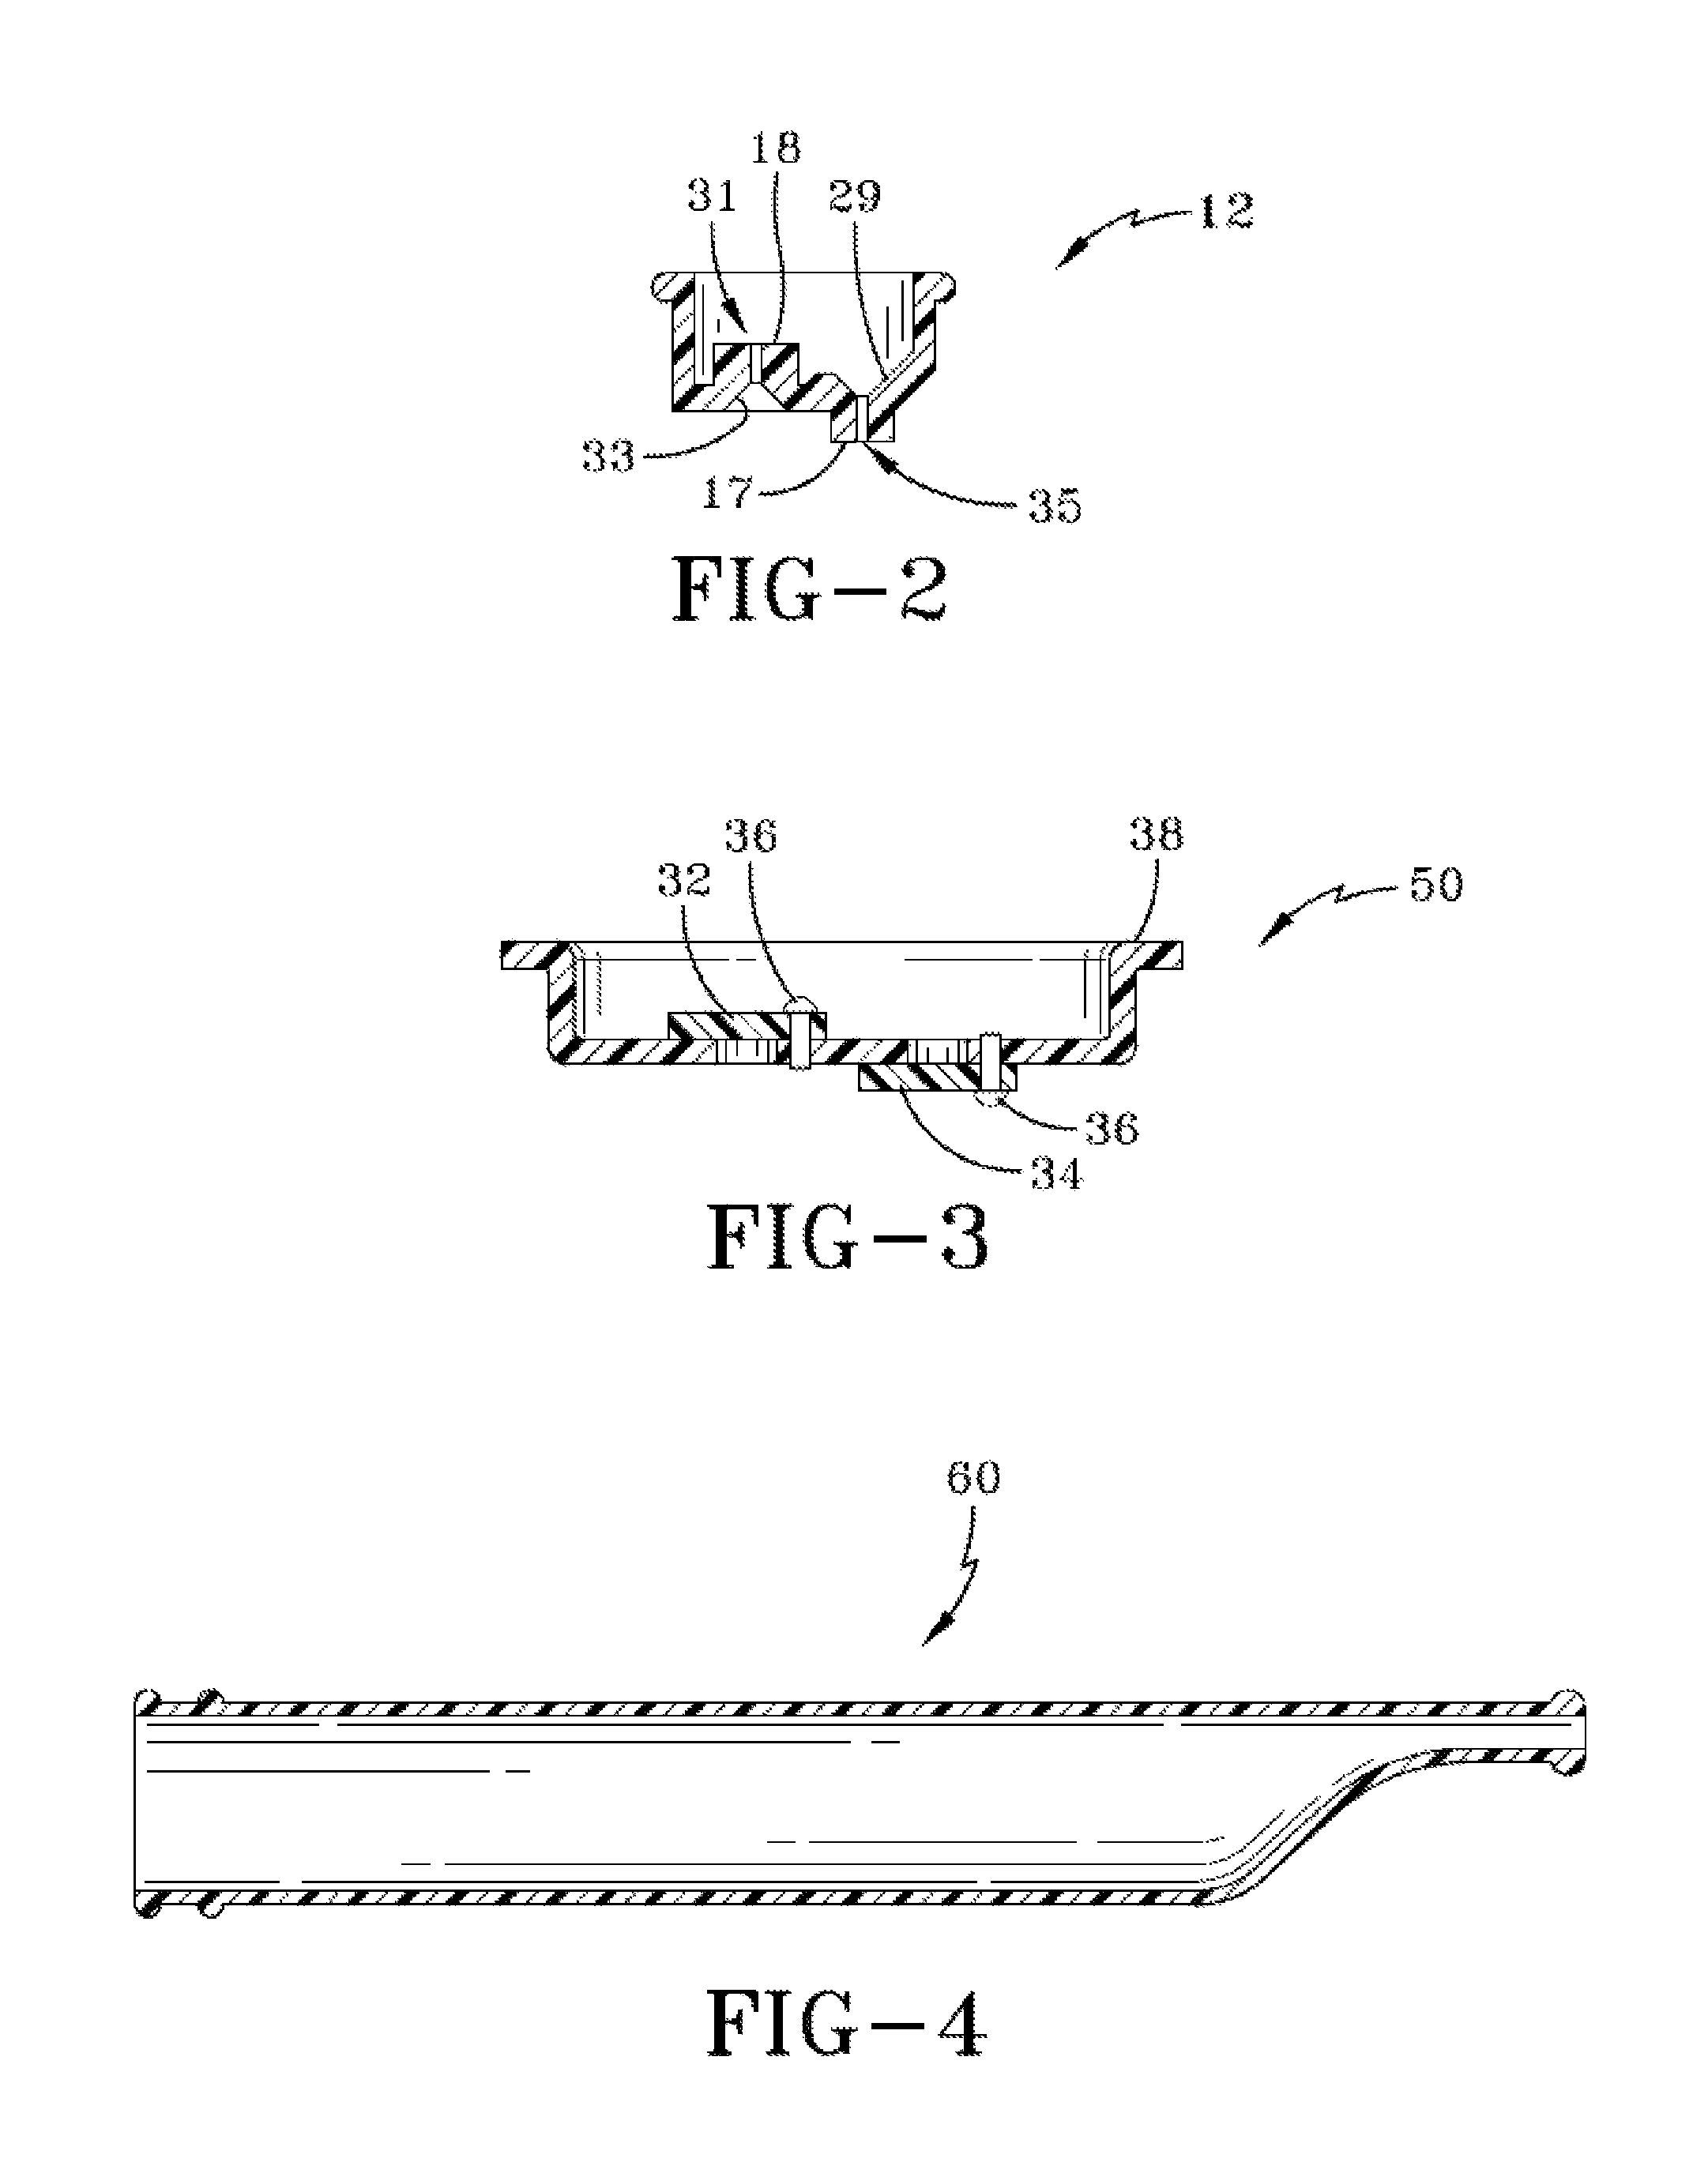 Leak resistant siphoning device for use in fluid transfer